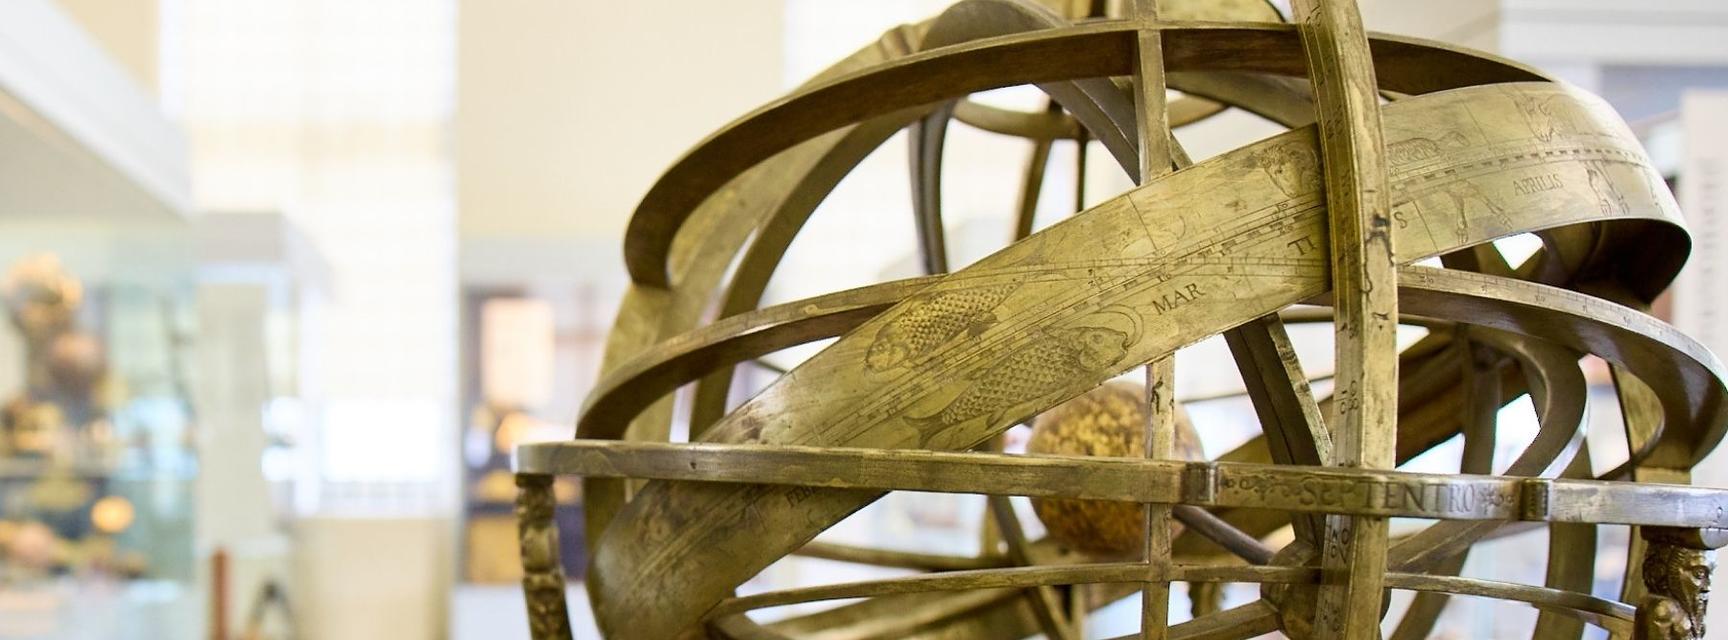 Armillary Sphere (70229) in the Top Gallery, History of Science Museum, University of Oxford (Photo by Ian Wallman)